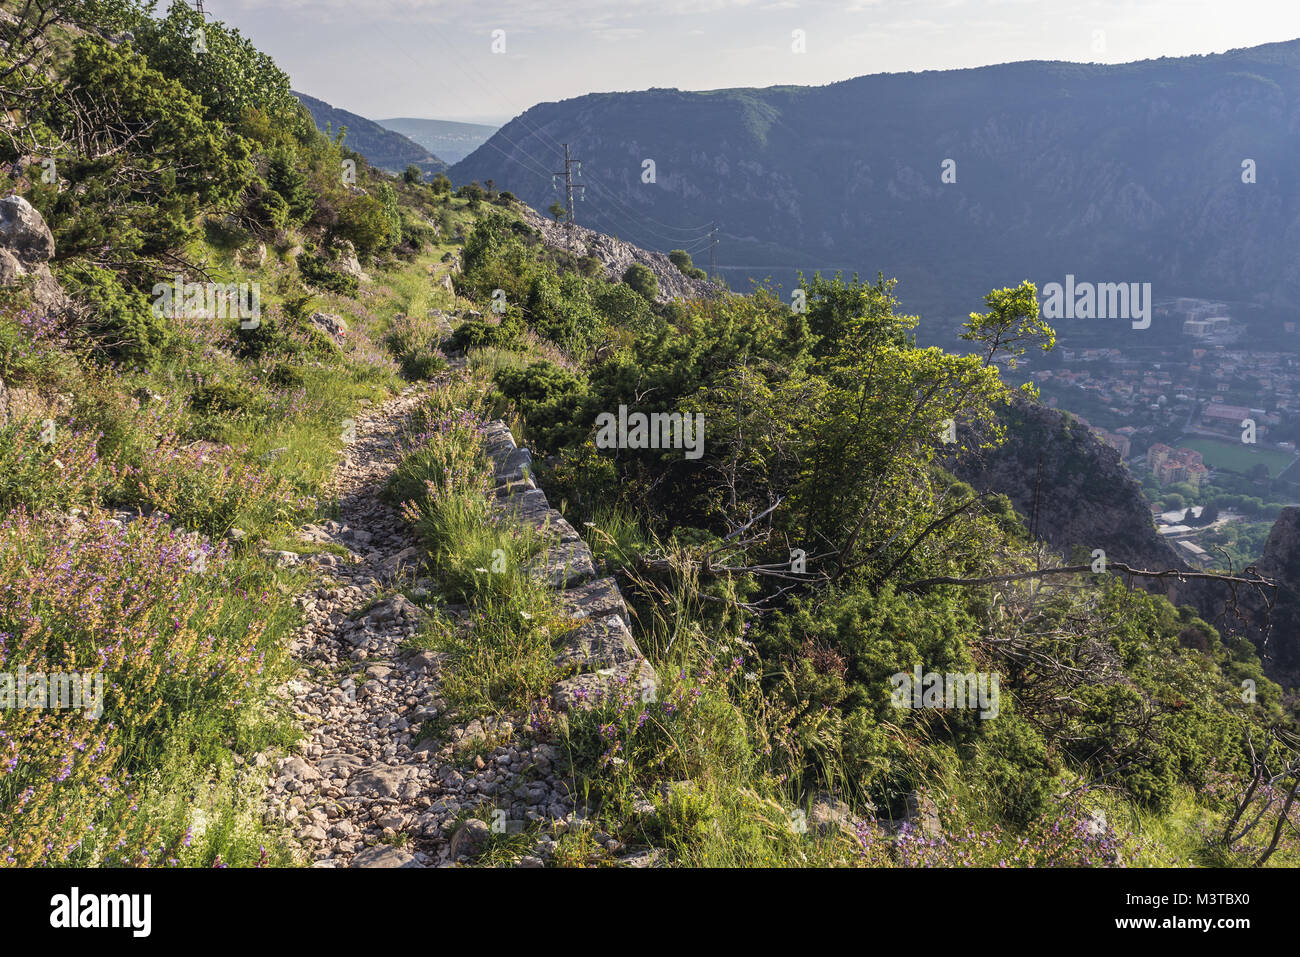 Tourist path on the mountain above Kotor coastal city, located in Bay of Kotor of Adriatic Sea, Montenegro Stock Photo